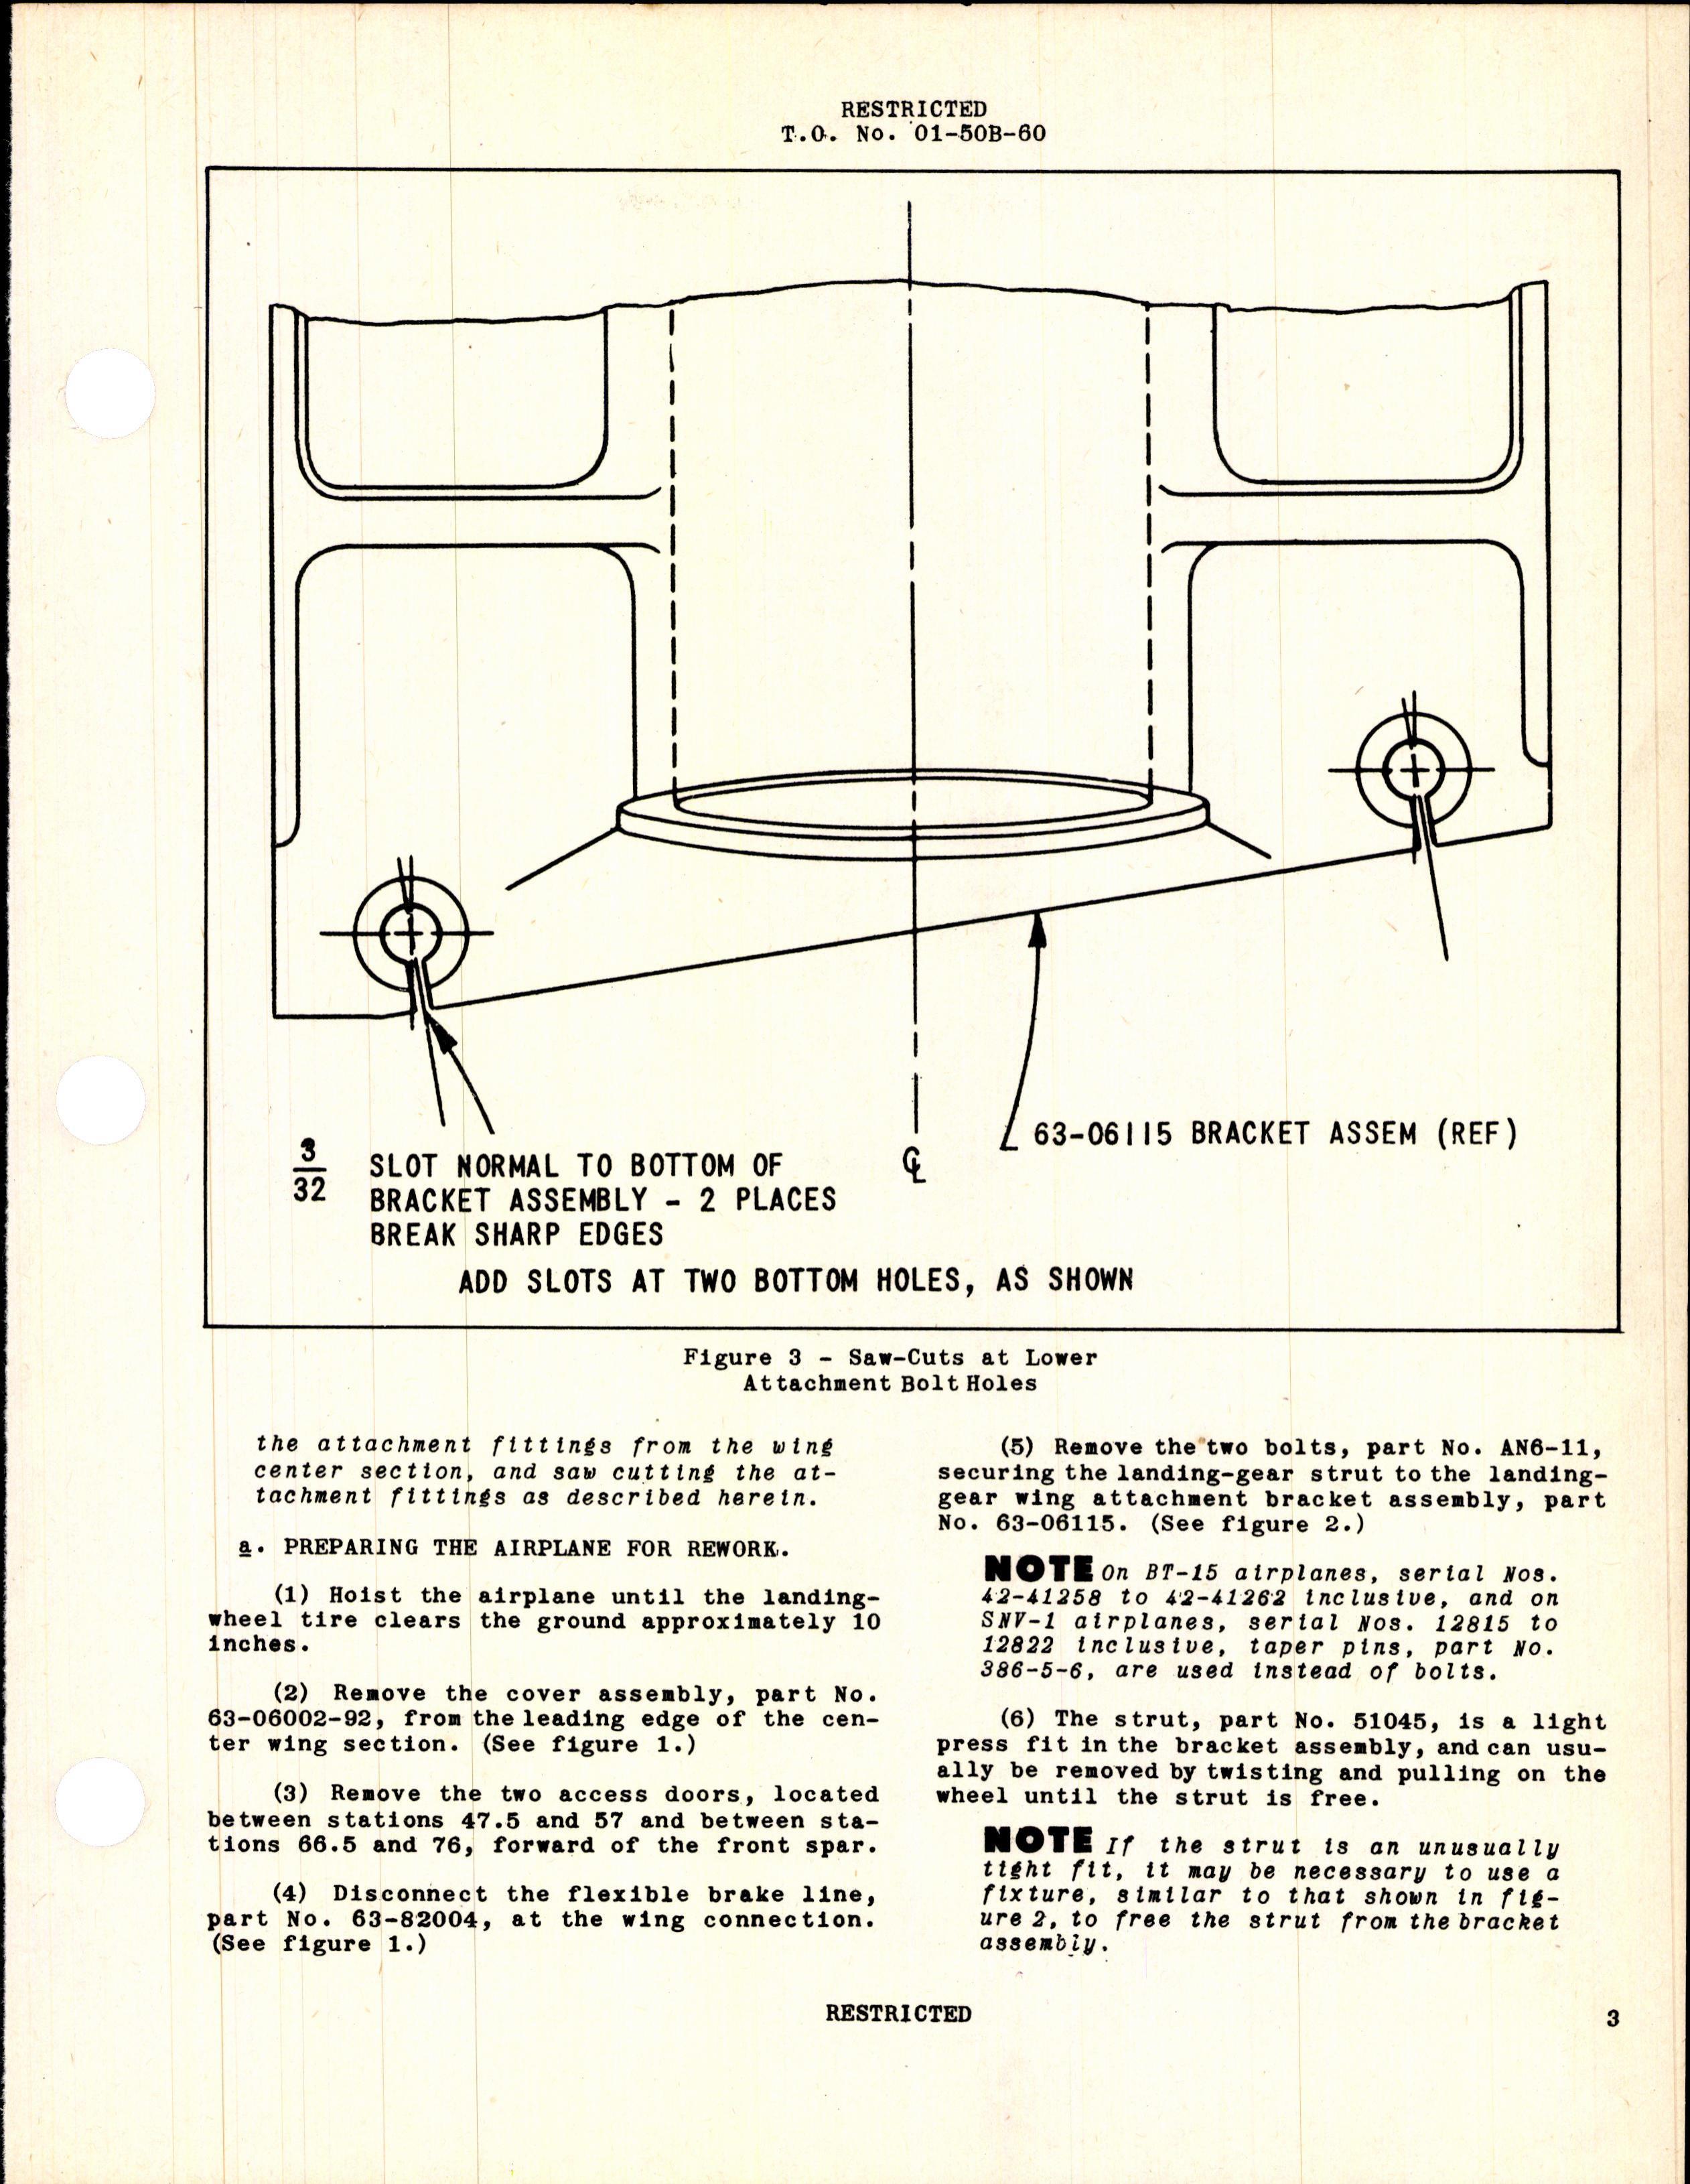 Sample page 3 from AirCorps Library document: Rework of Landing-Gear attachment brackets - BT-13, BT-13A, BT-15, and SNV-1